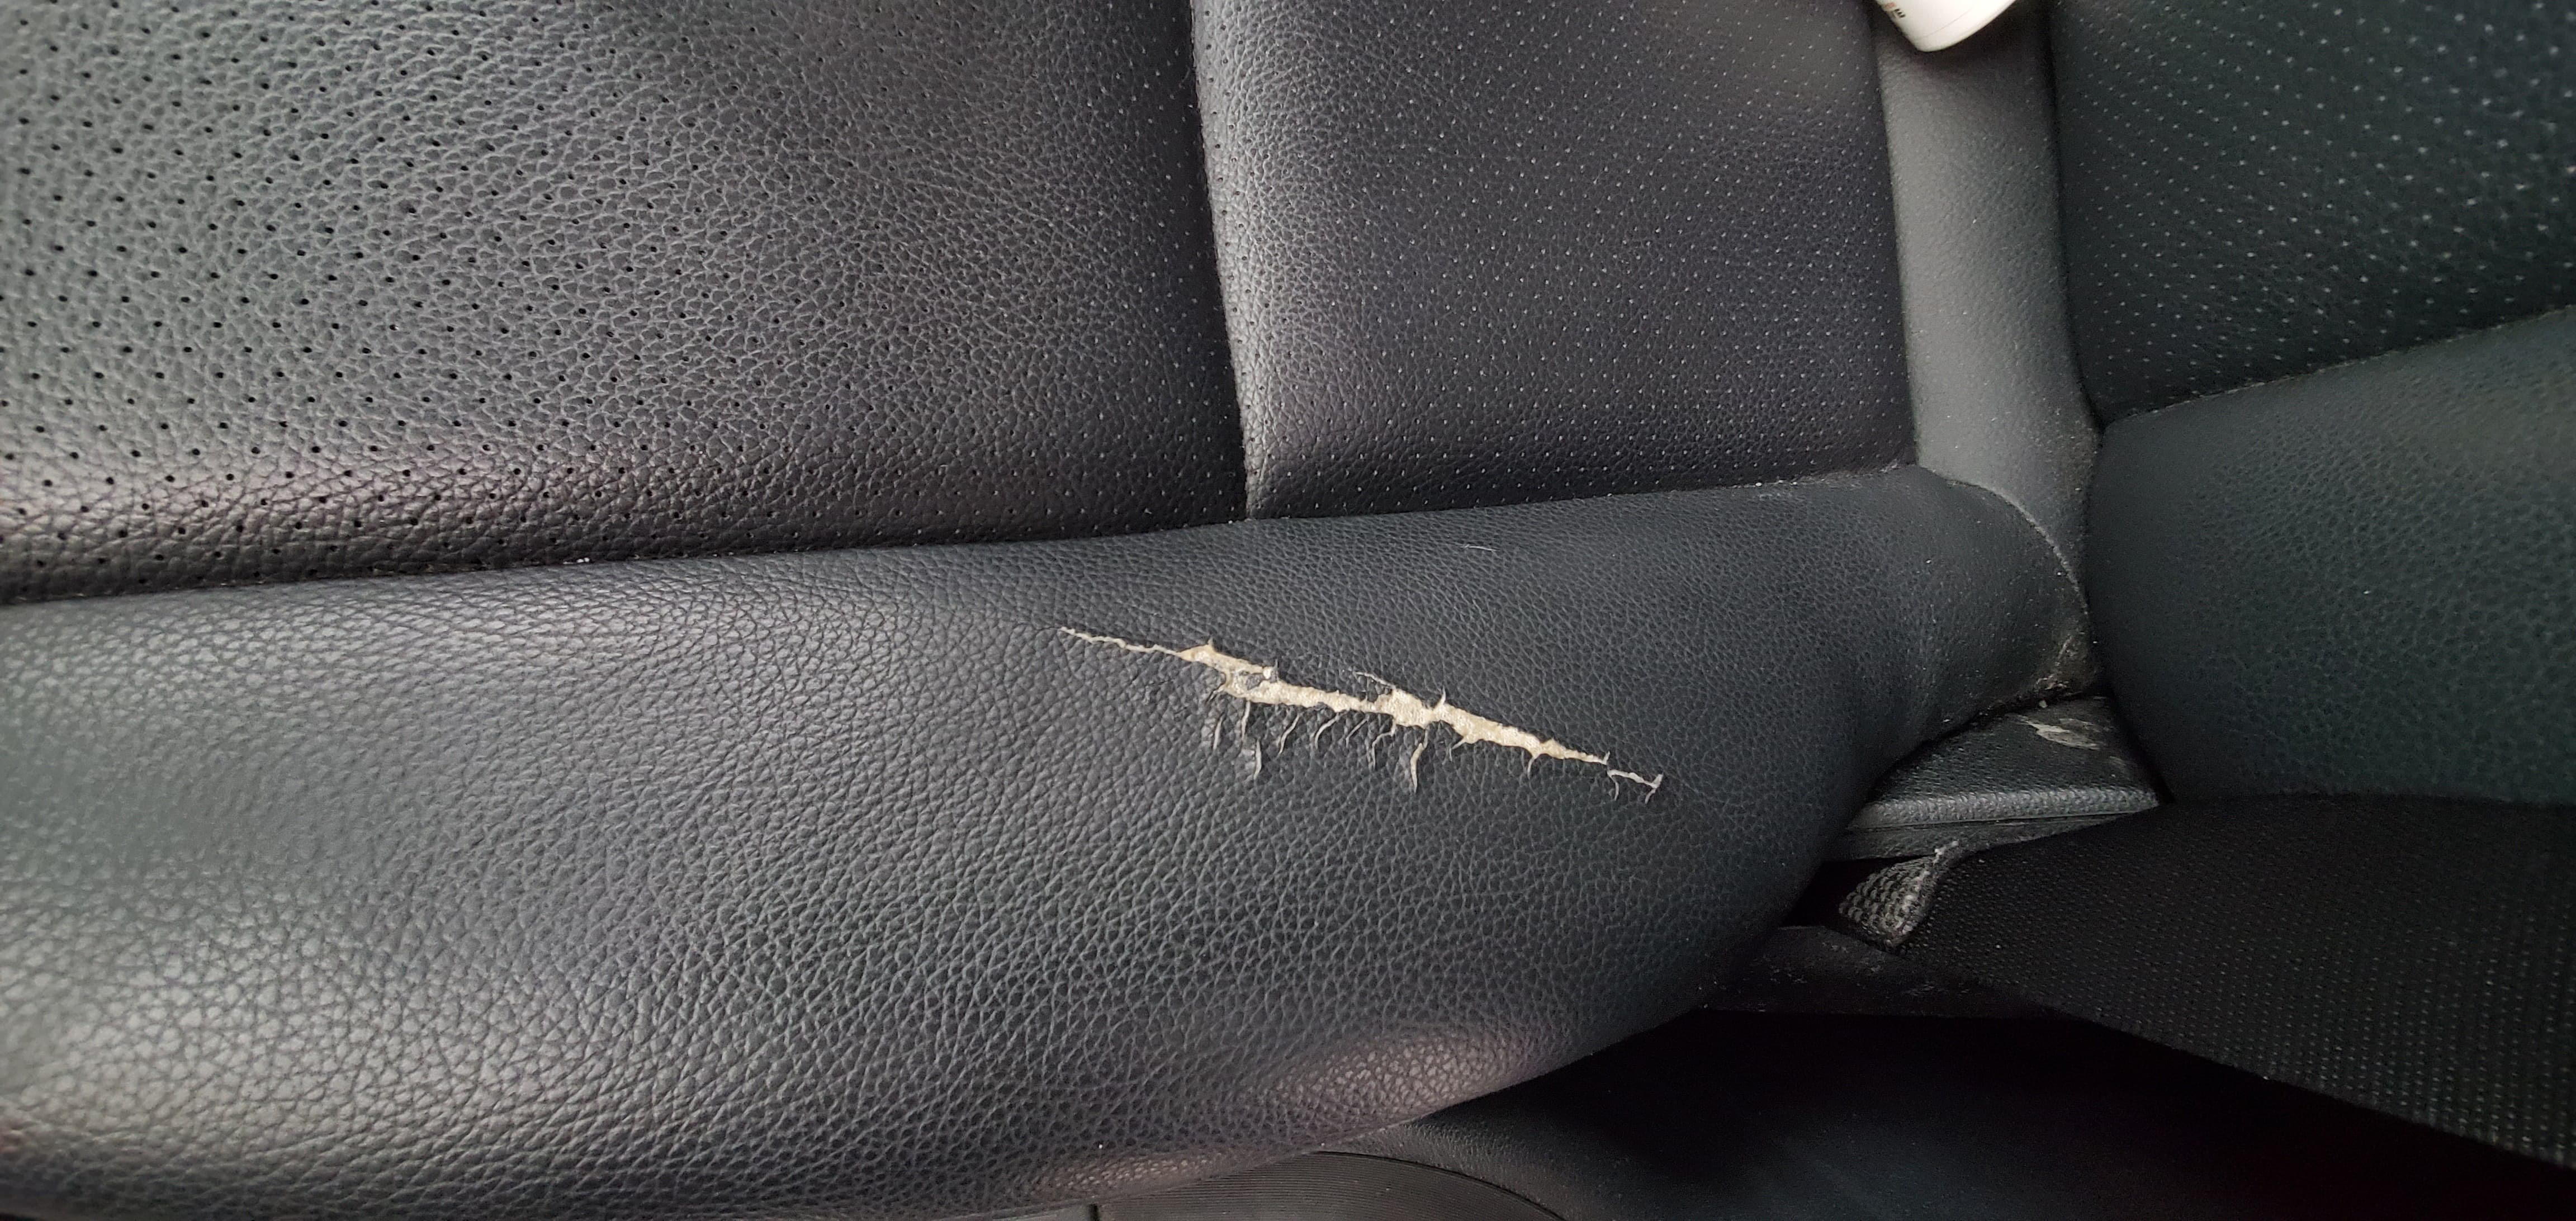 How to Fix A Hole in a Leather Car Seat